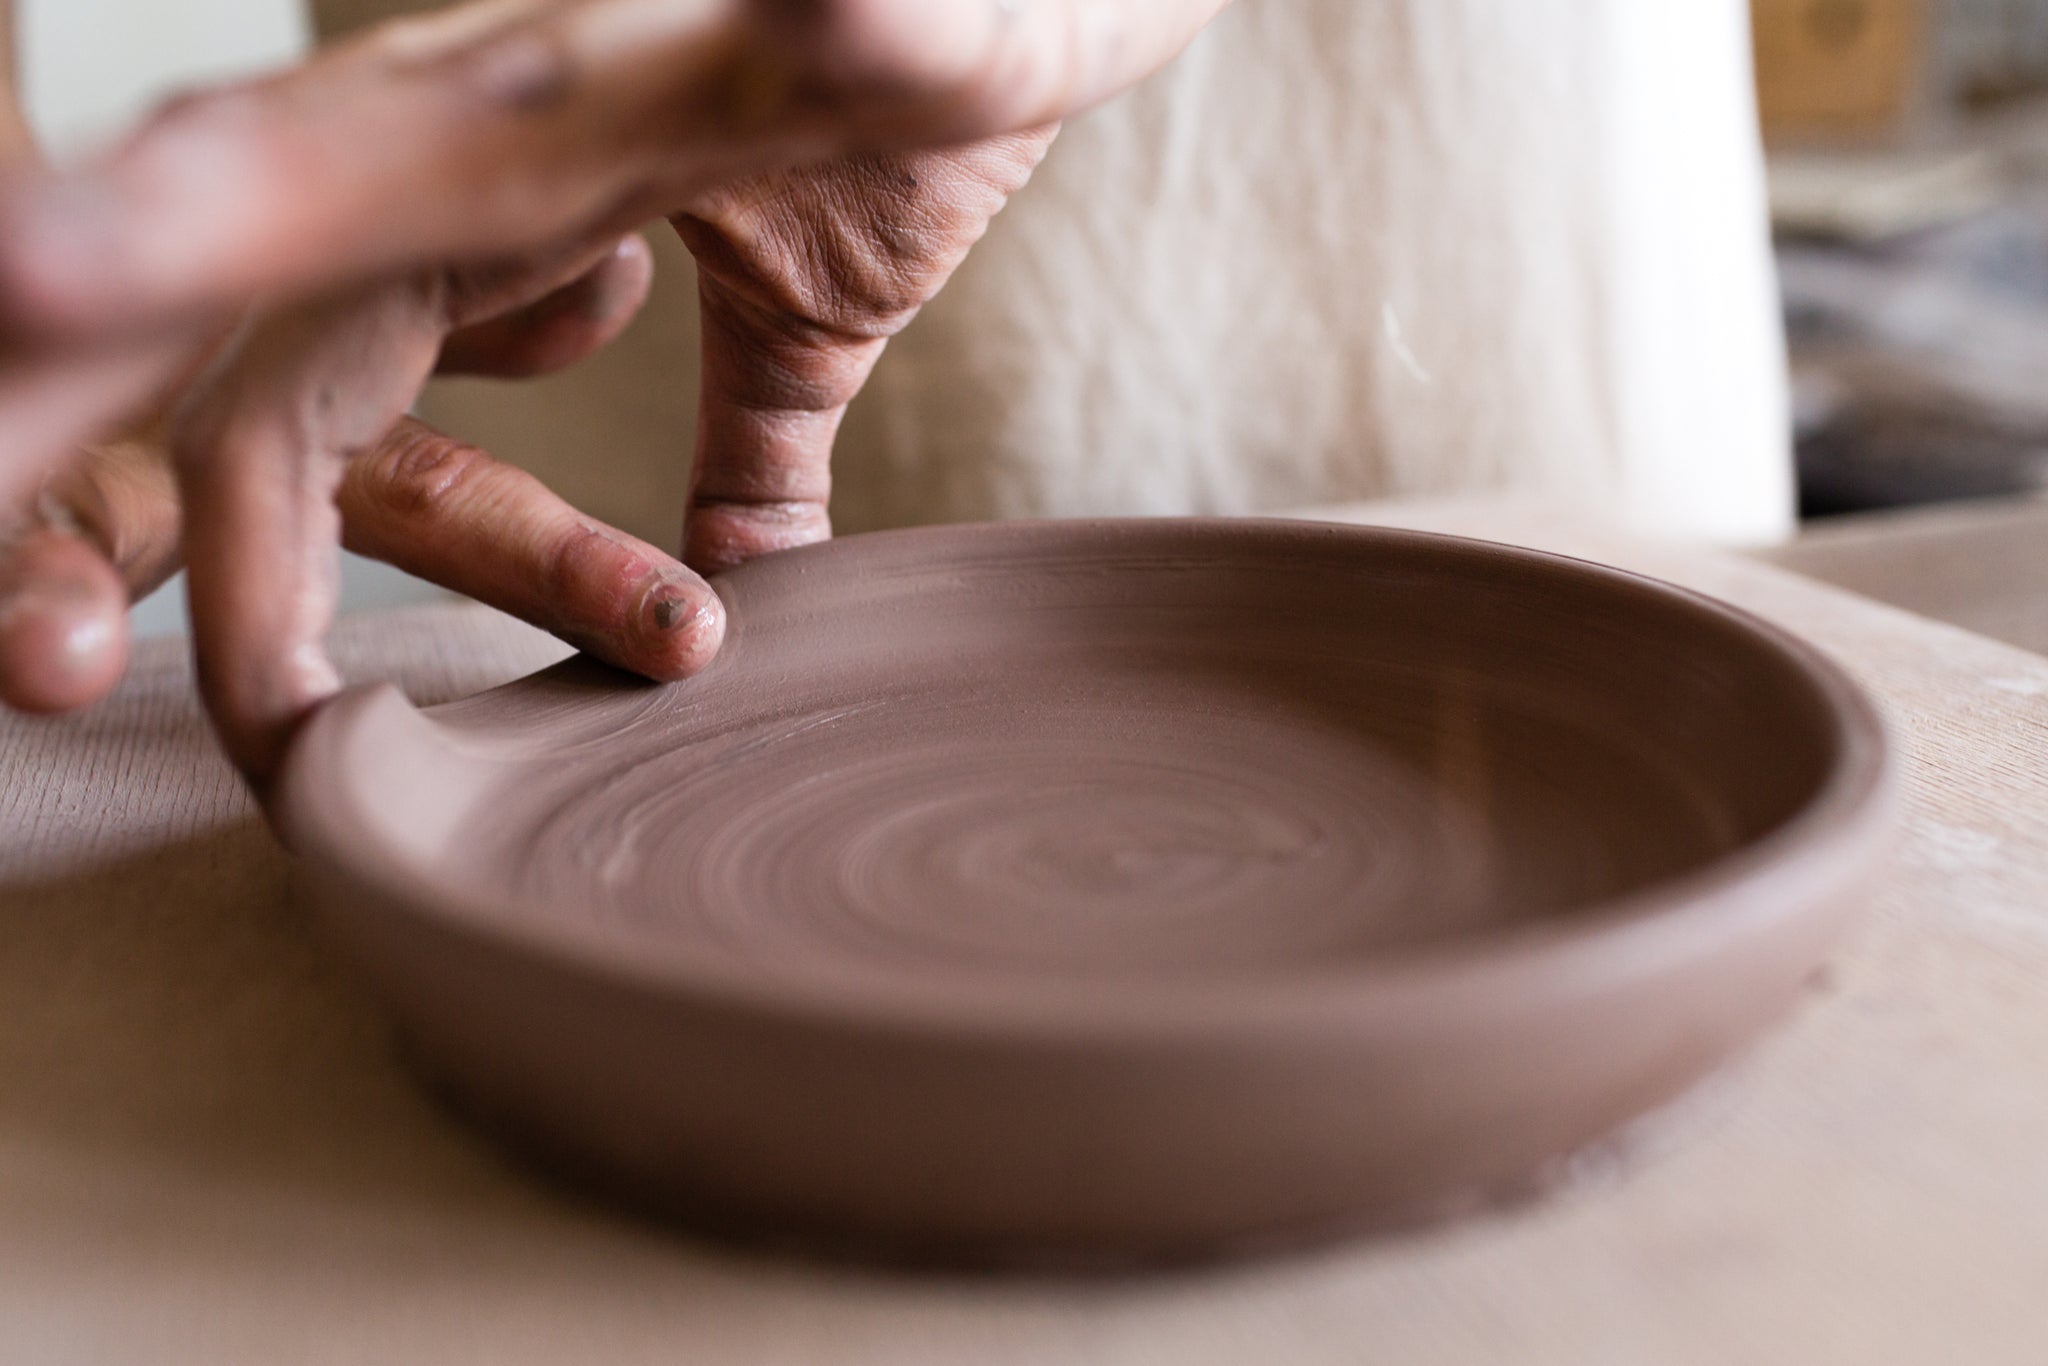 person making a dish out of clay throwing pottery